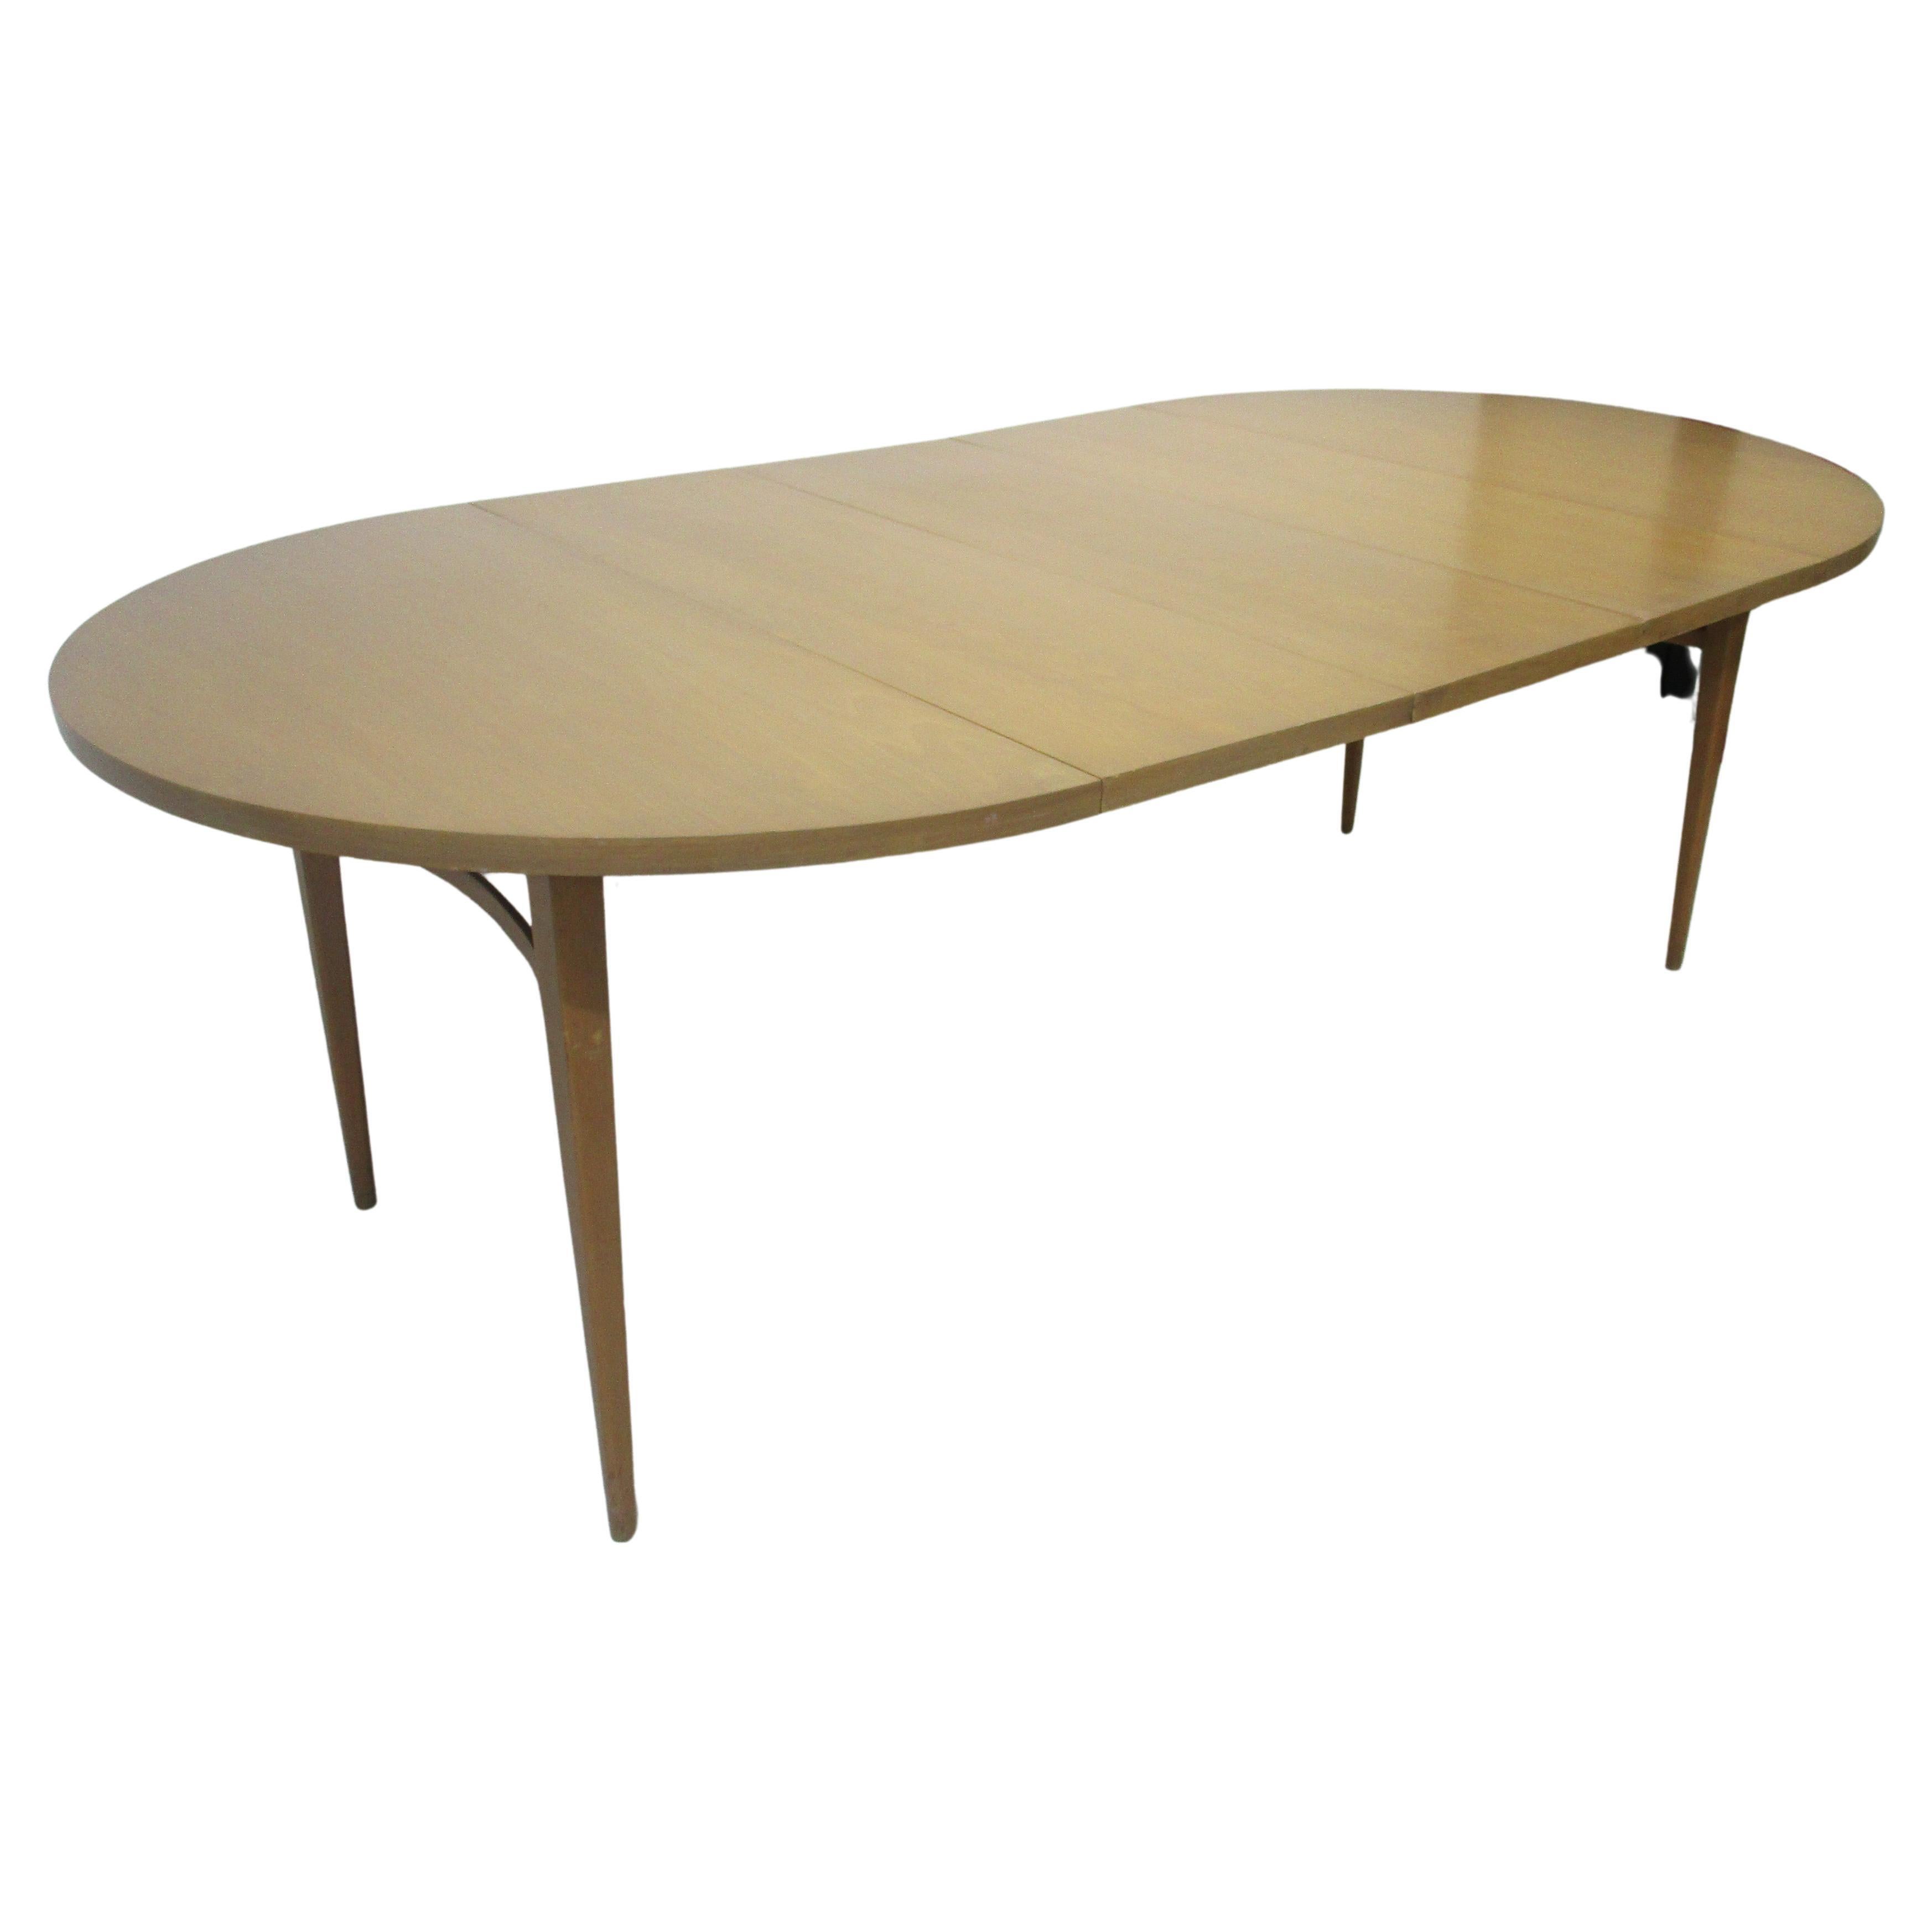 Paul McCobb Dining Table from the Perimeter Group Collection 